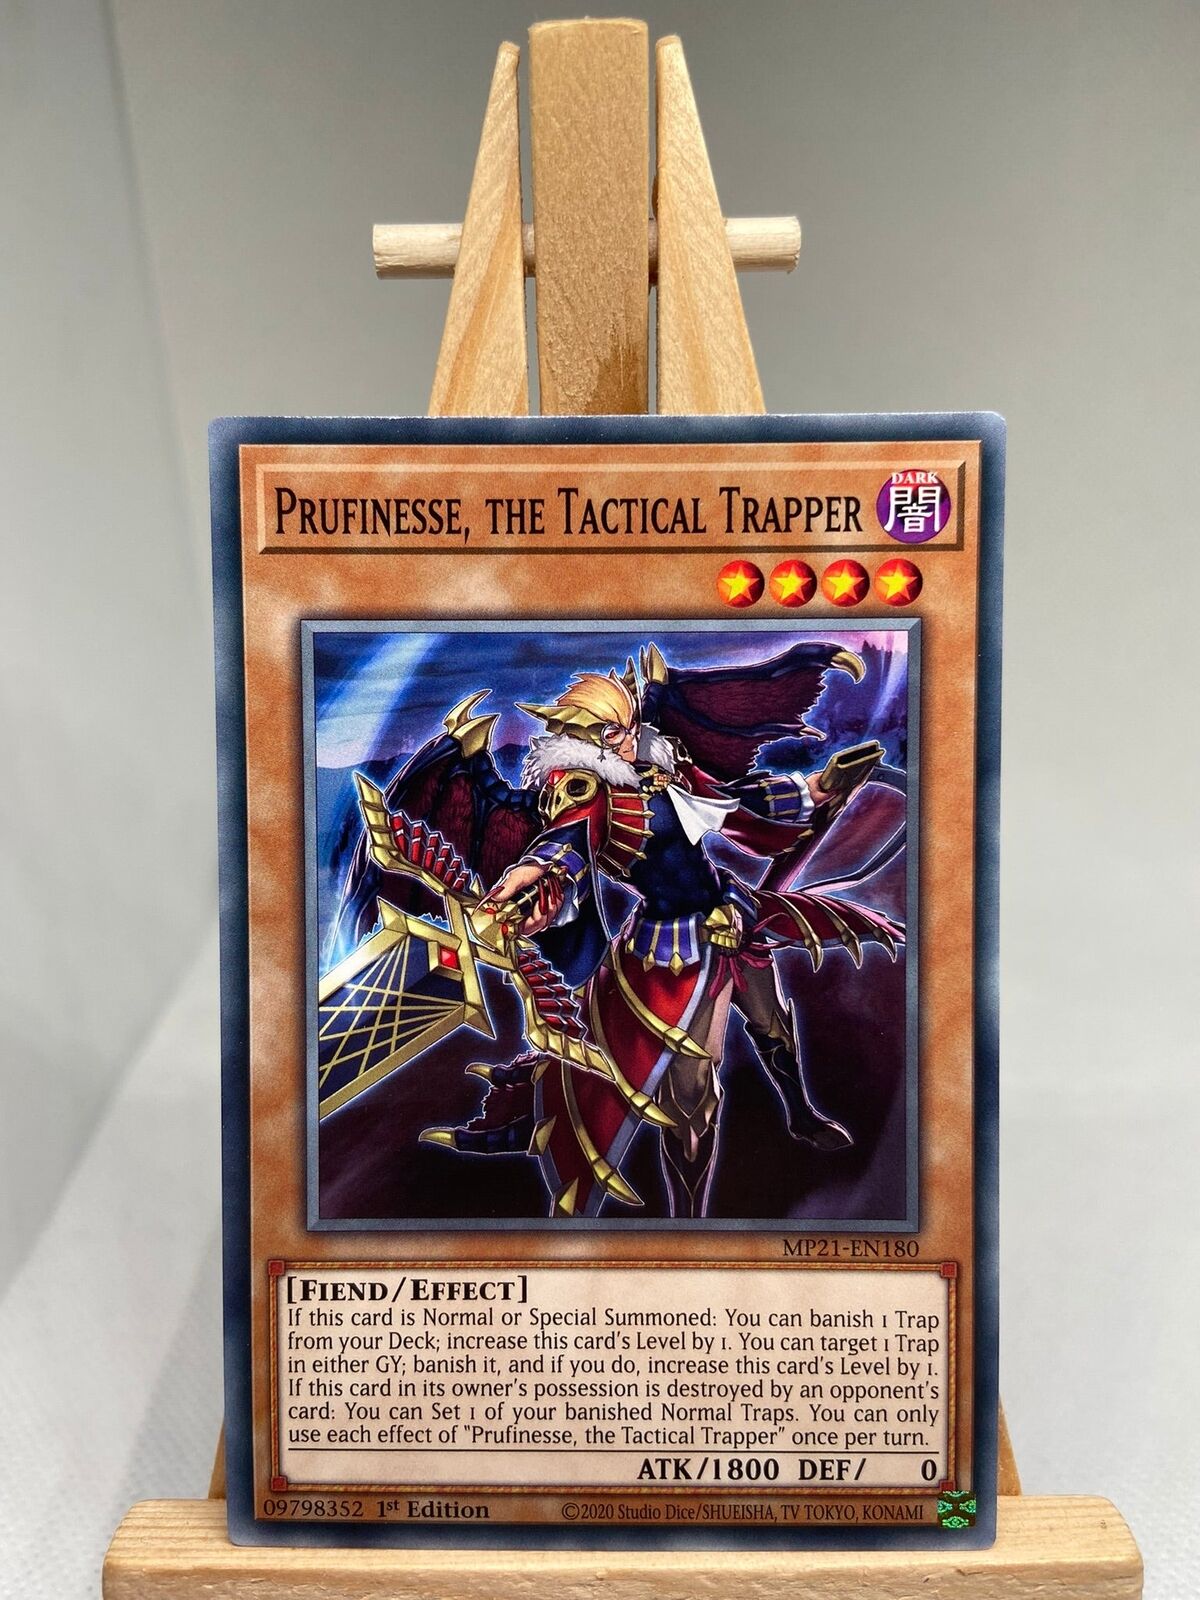 Prufinesse, The Tactical Trapper - 1st Edition MP21-EN180 - NM - YuGiOh